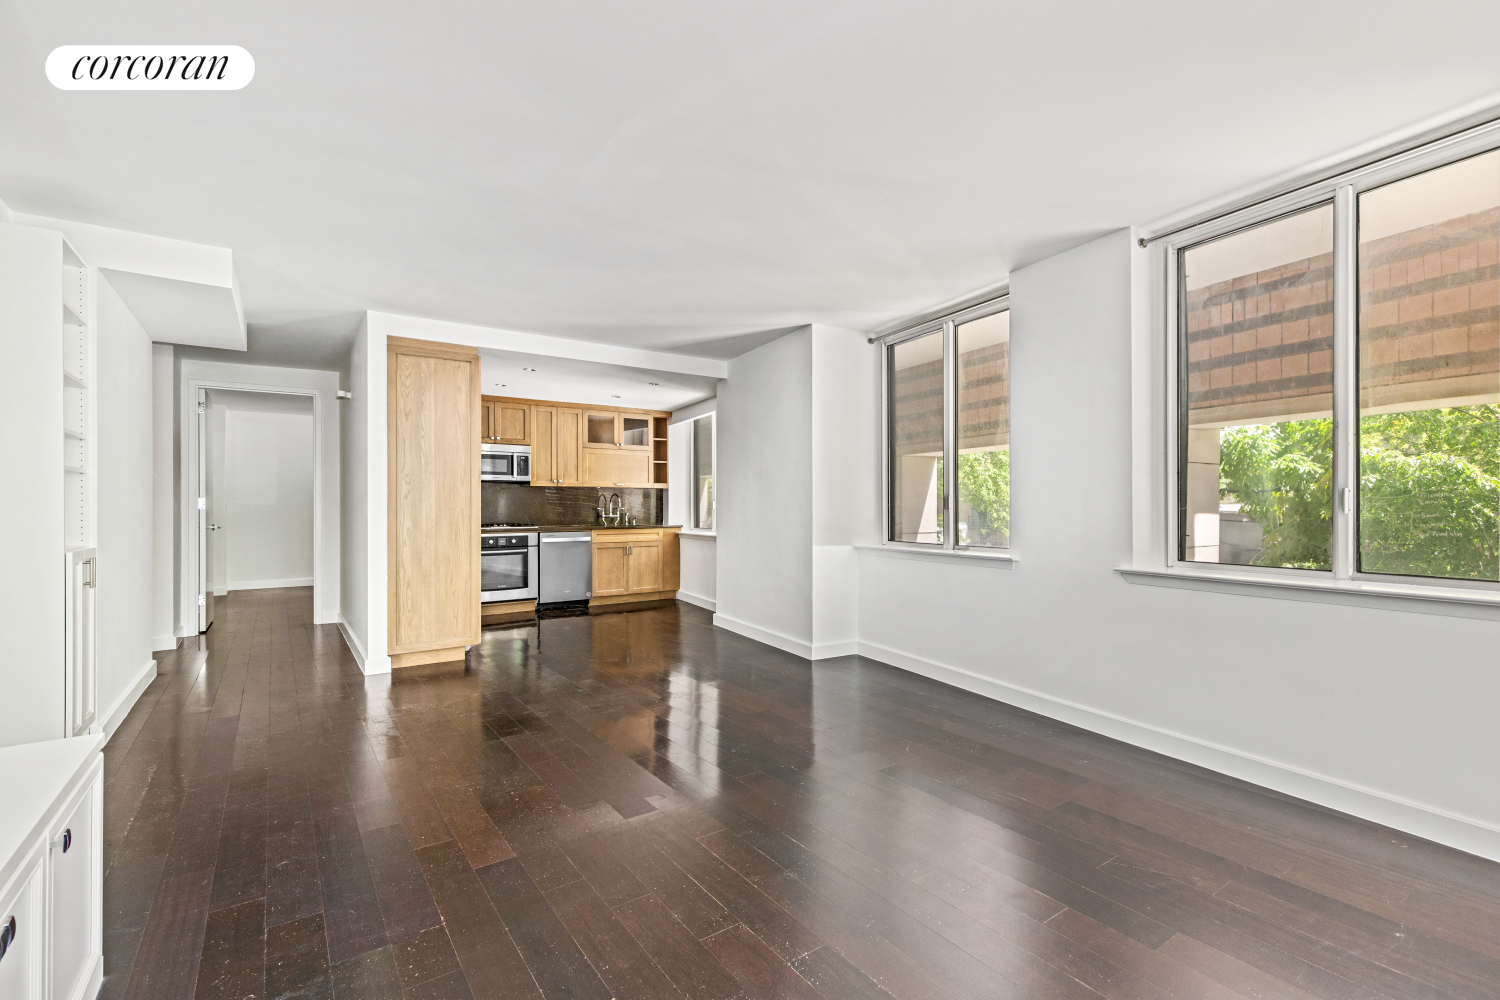 333 Rector Place 204, Battery Park City, Downtown, NYC - 2 Bedrooms  
2 Bathrooms  
6 Rooms - 